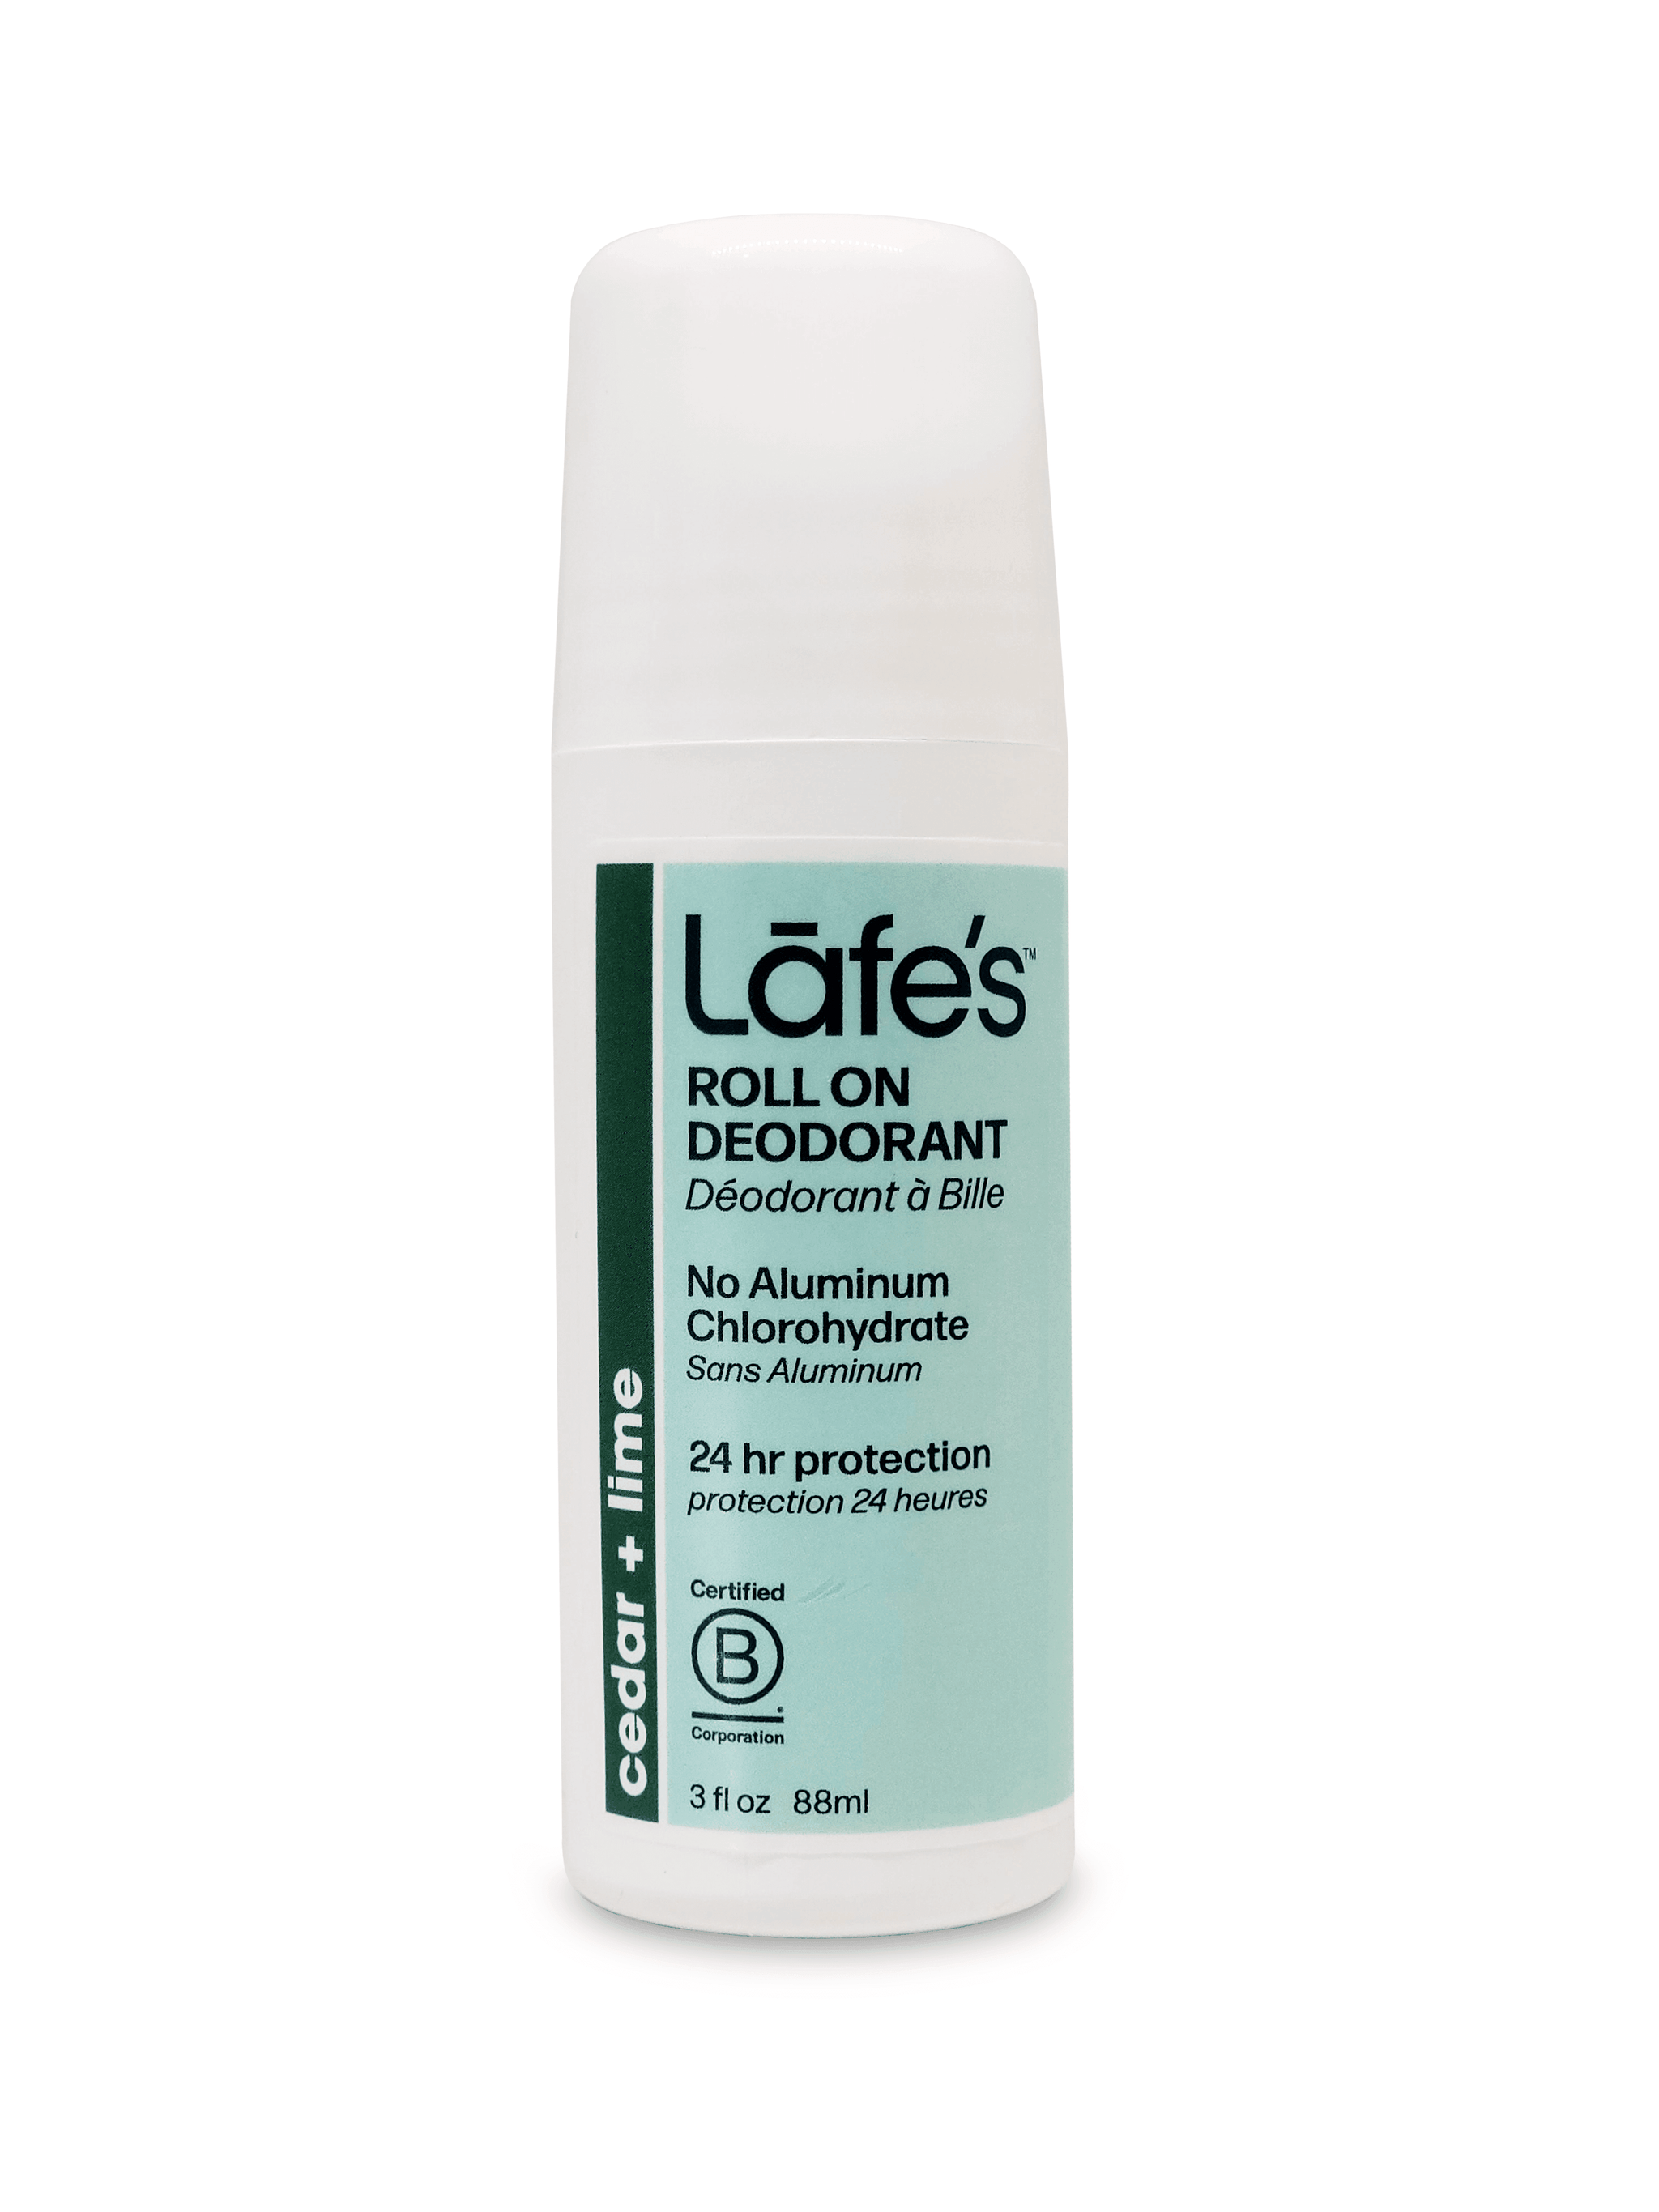 Lafe's Body Care All Natural Fresh Roll-On Deodorant 71g